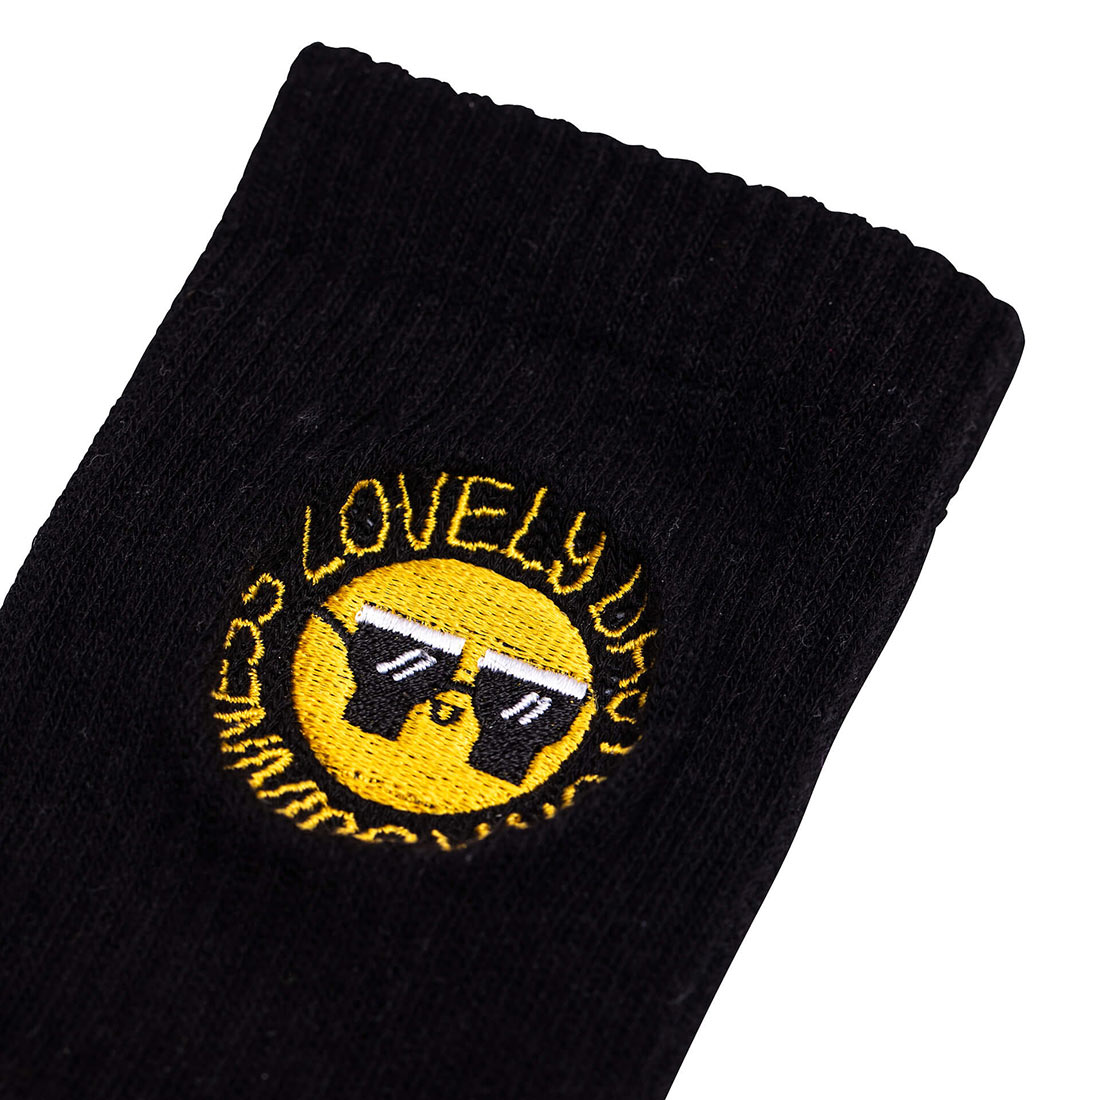 A stylish and comfortable FATTI BURKE "LOVELY DAY FOR A GUINNESS" black sock with a smiley face on it.